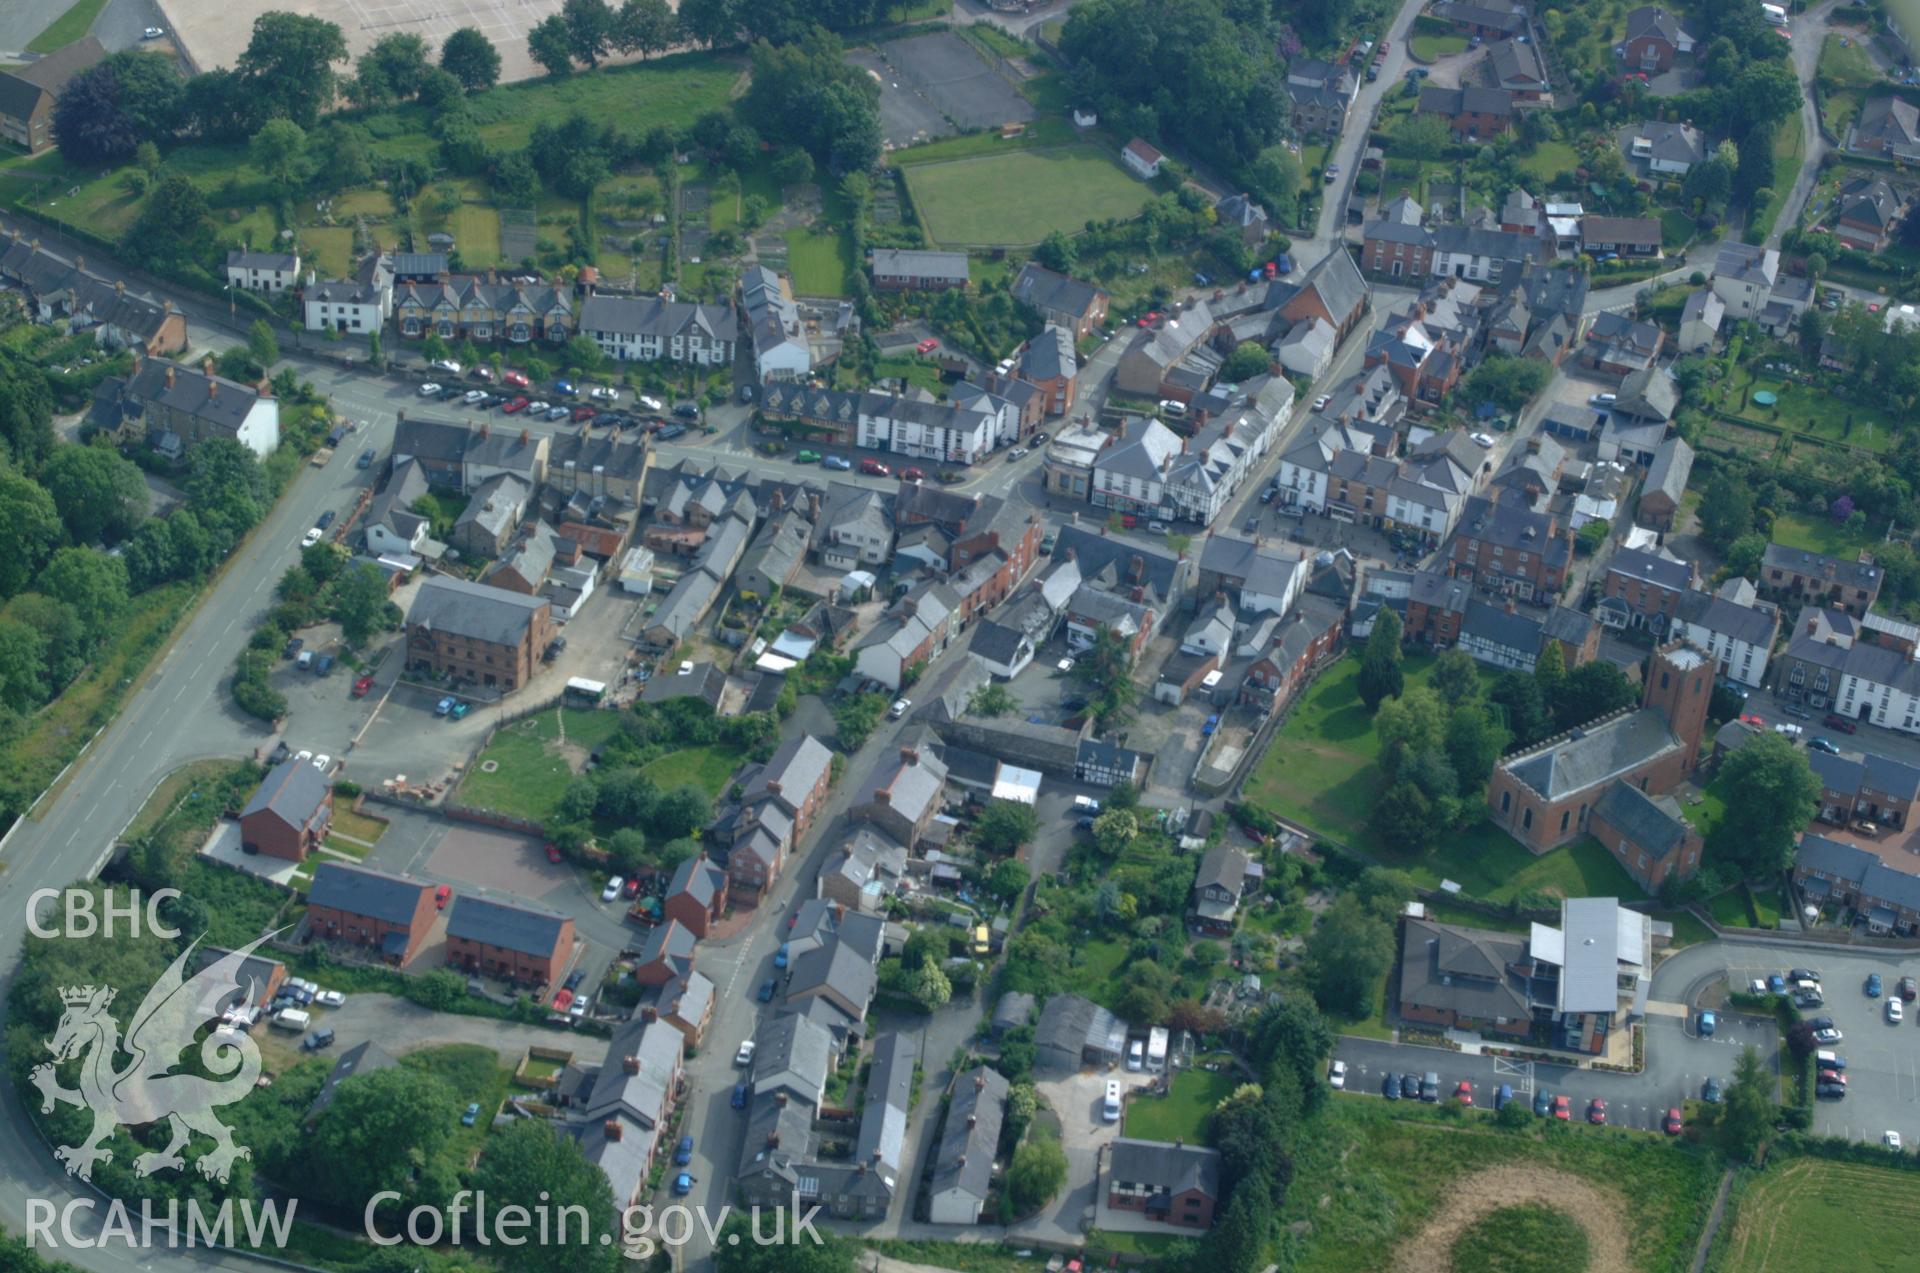 RCAHMW colour oblique aerial photograph of Llanfyllin taken on 08/06/2004 by Toby Driver